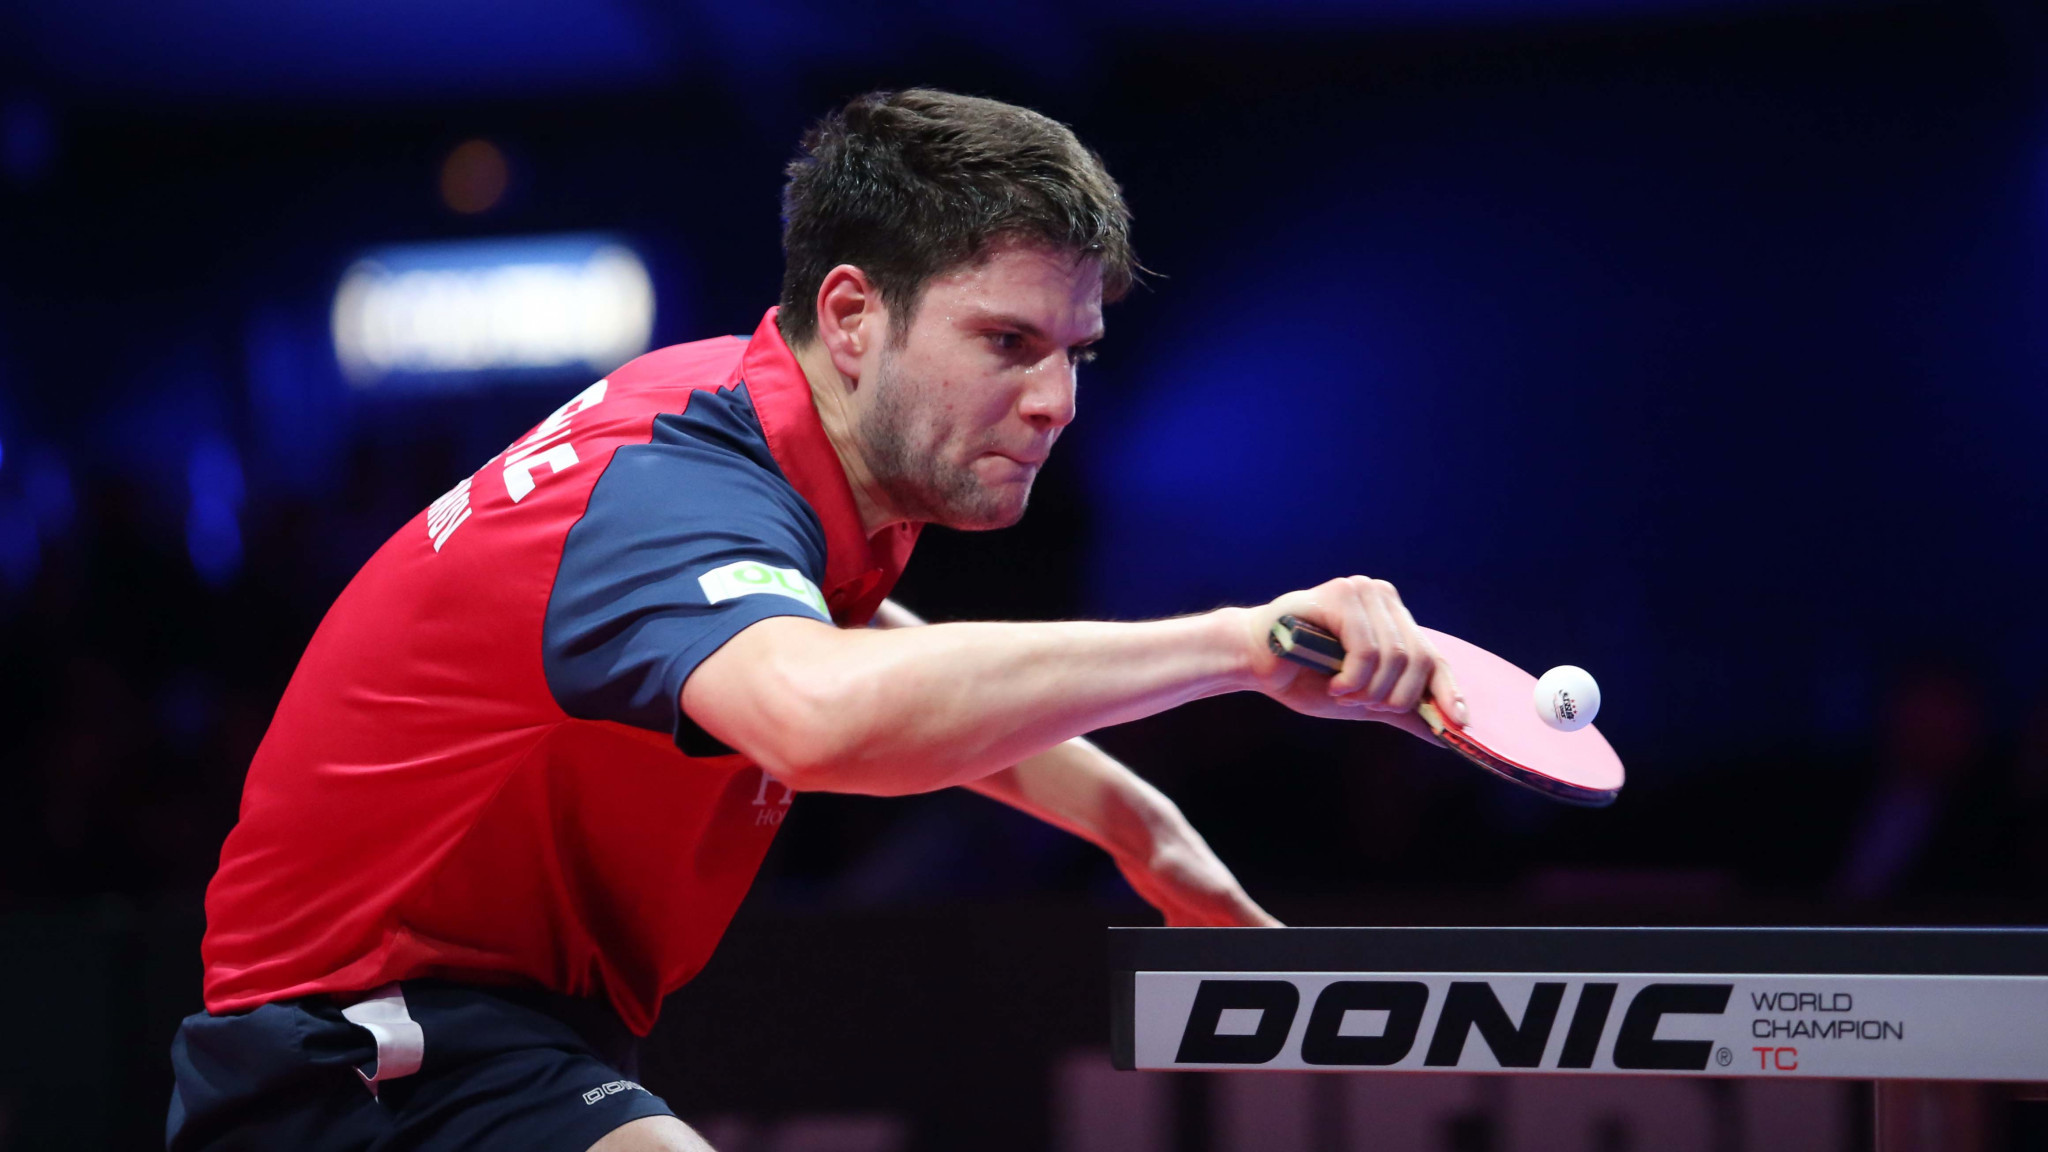 Dimitrij Ovtcharov lost to compatriot Timo Boll as his title defence ended ©ITTF